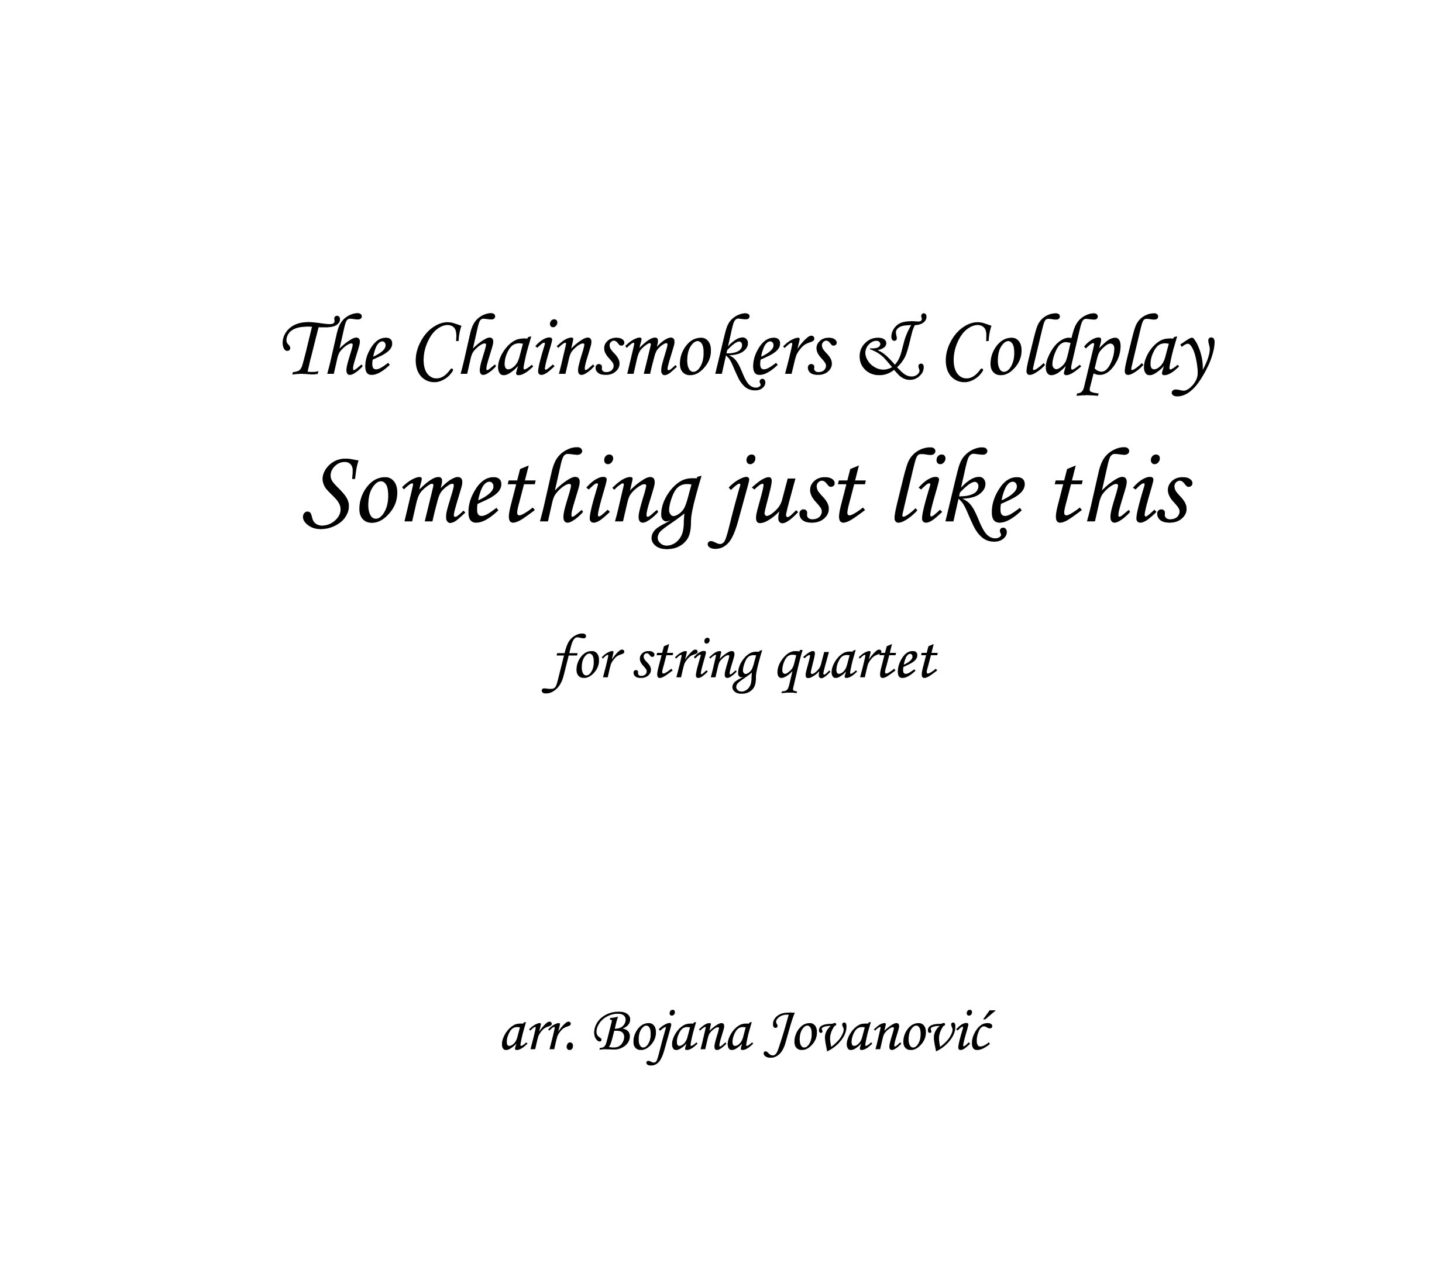 Something Just Like This - The Chainsmokers & Coldplay